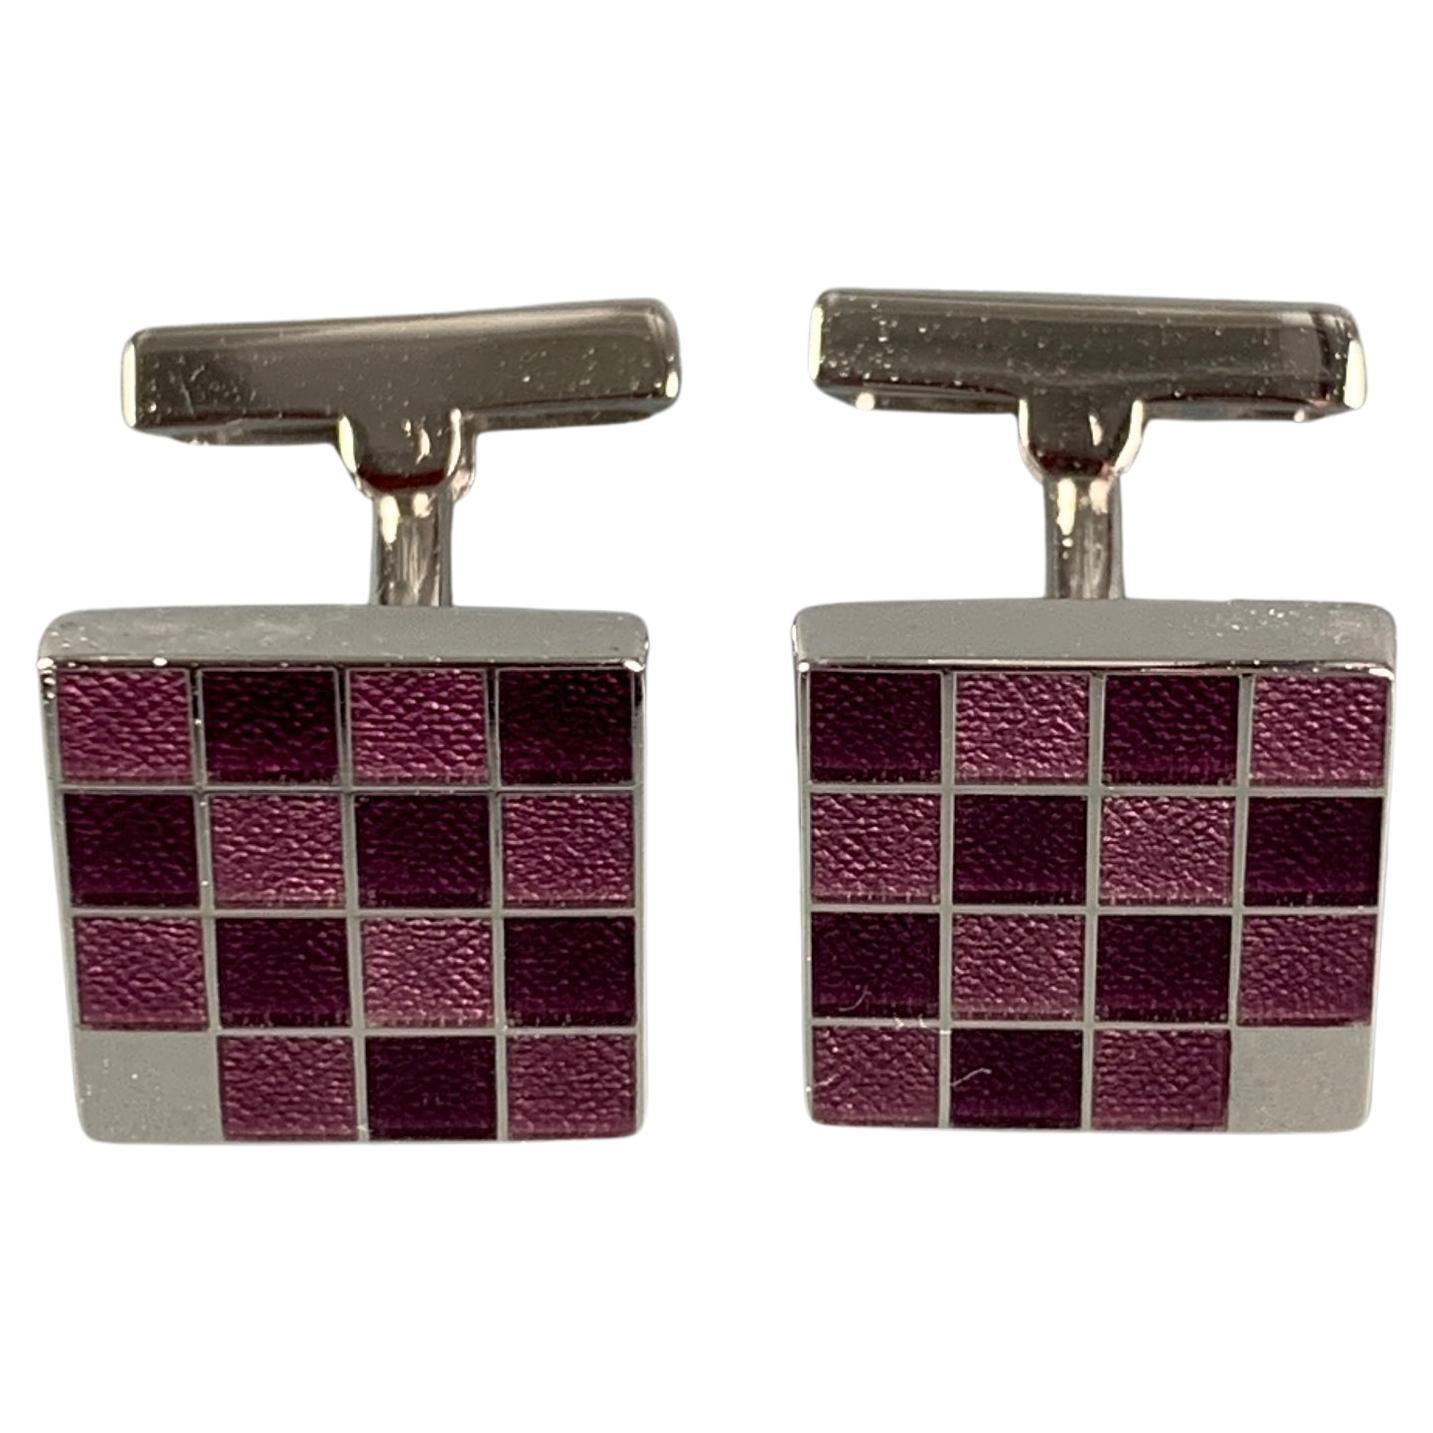 LOUIS VUITTON Burgundy Checkered Leather Enamel Damier Sterling Silver Cuff Link